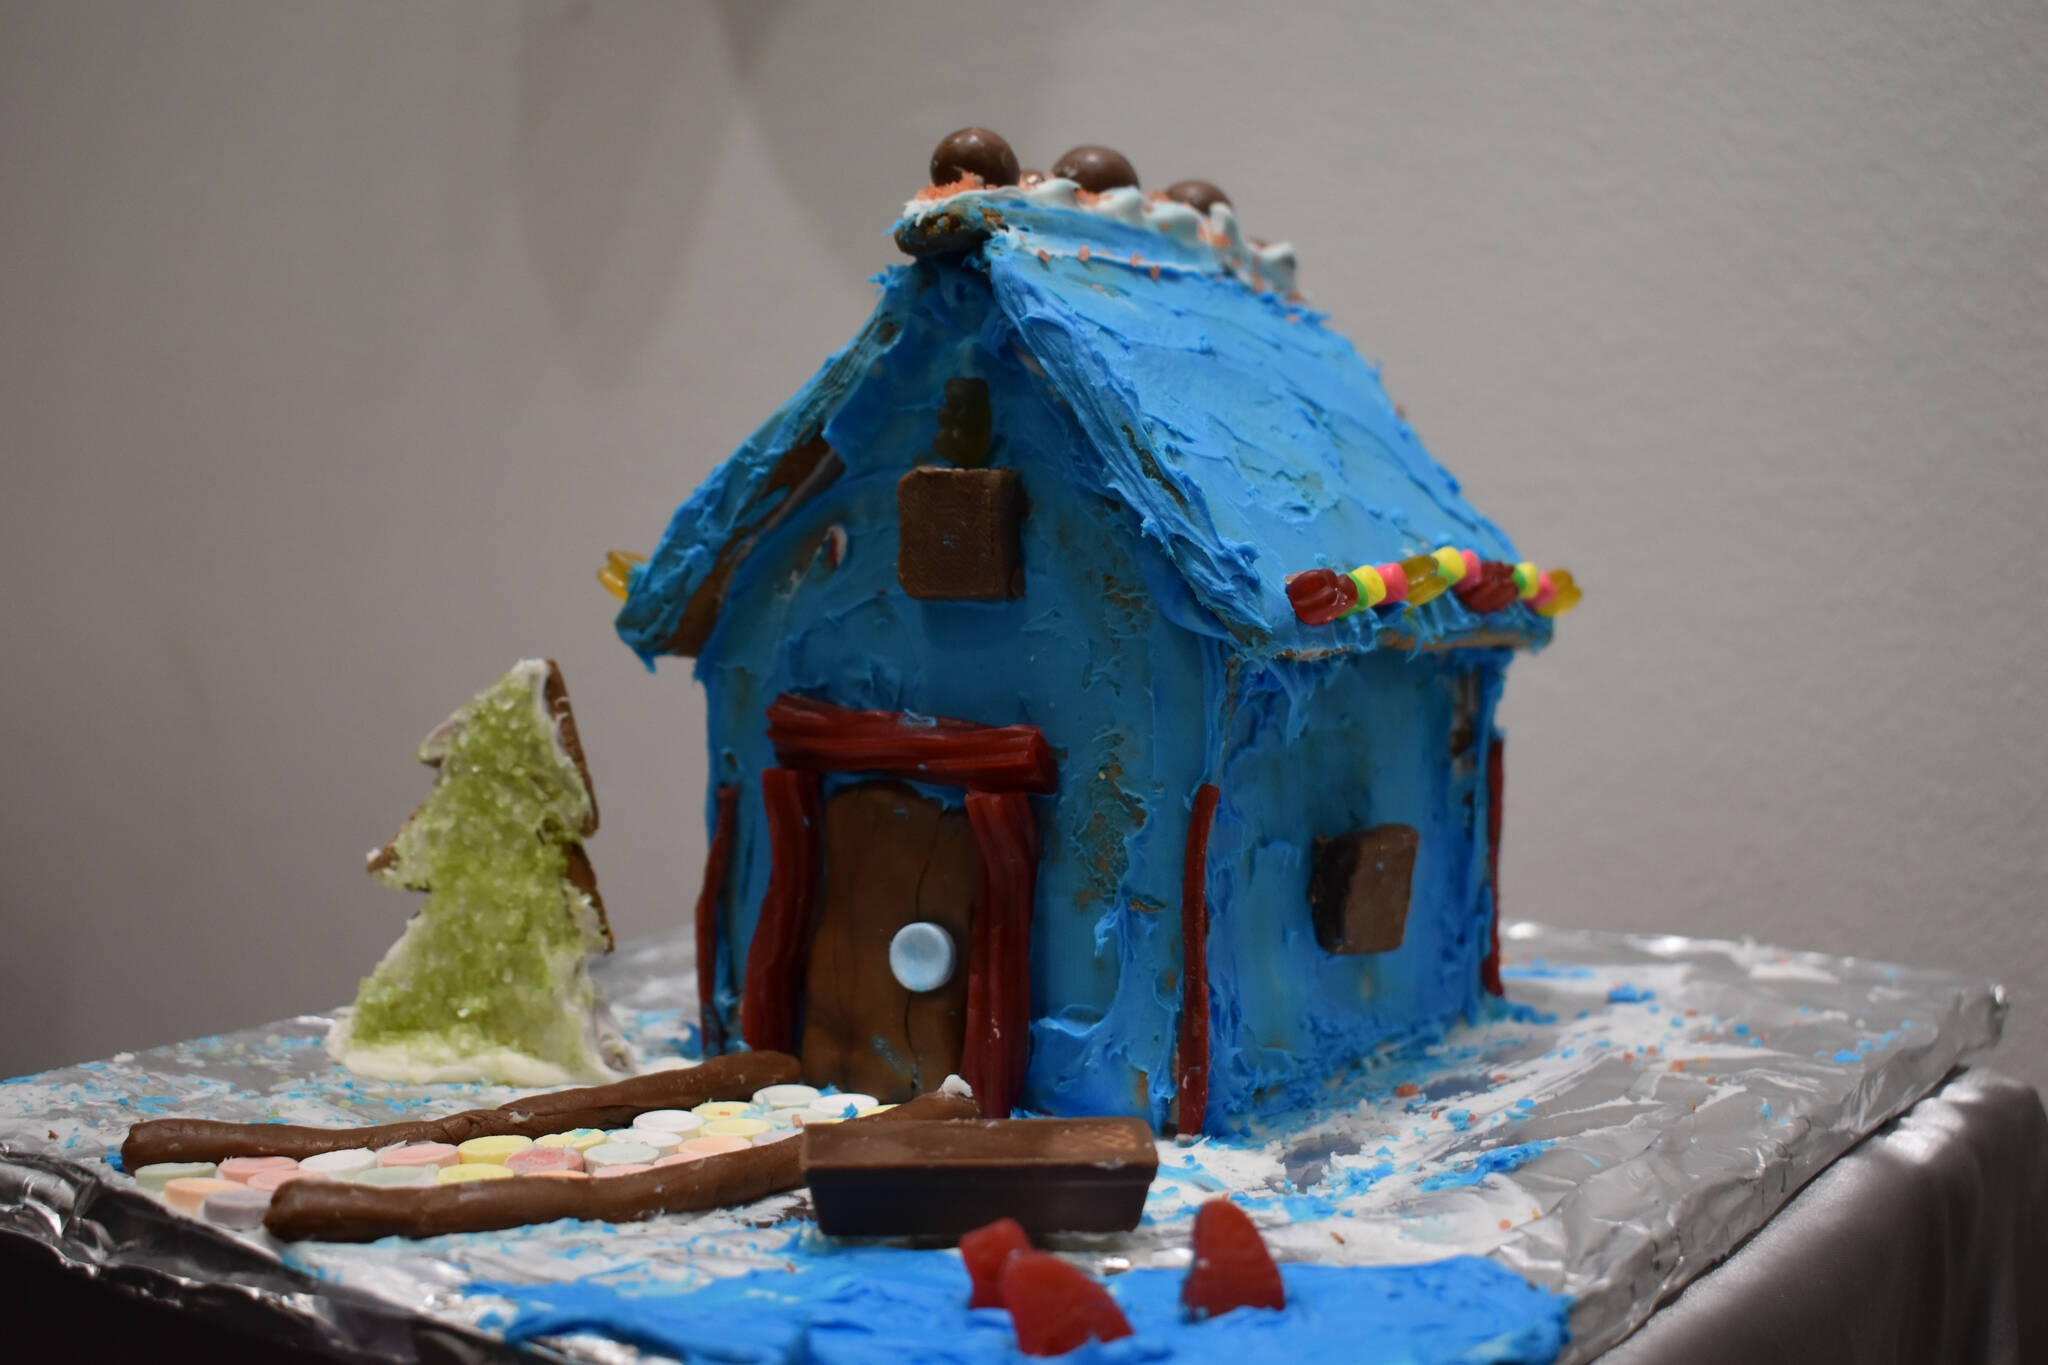 A gingerbread house designed by Henry Franklin is displayed at the Kenai Chamber of Commerce and Visitor Center on Tuesday, Dec. 6, 2022. (Jake Dye/Peninsula Clarion)